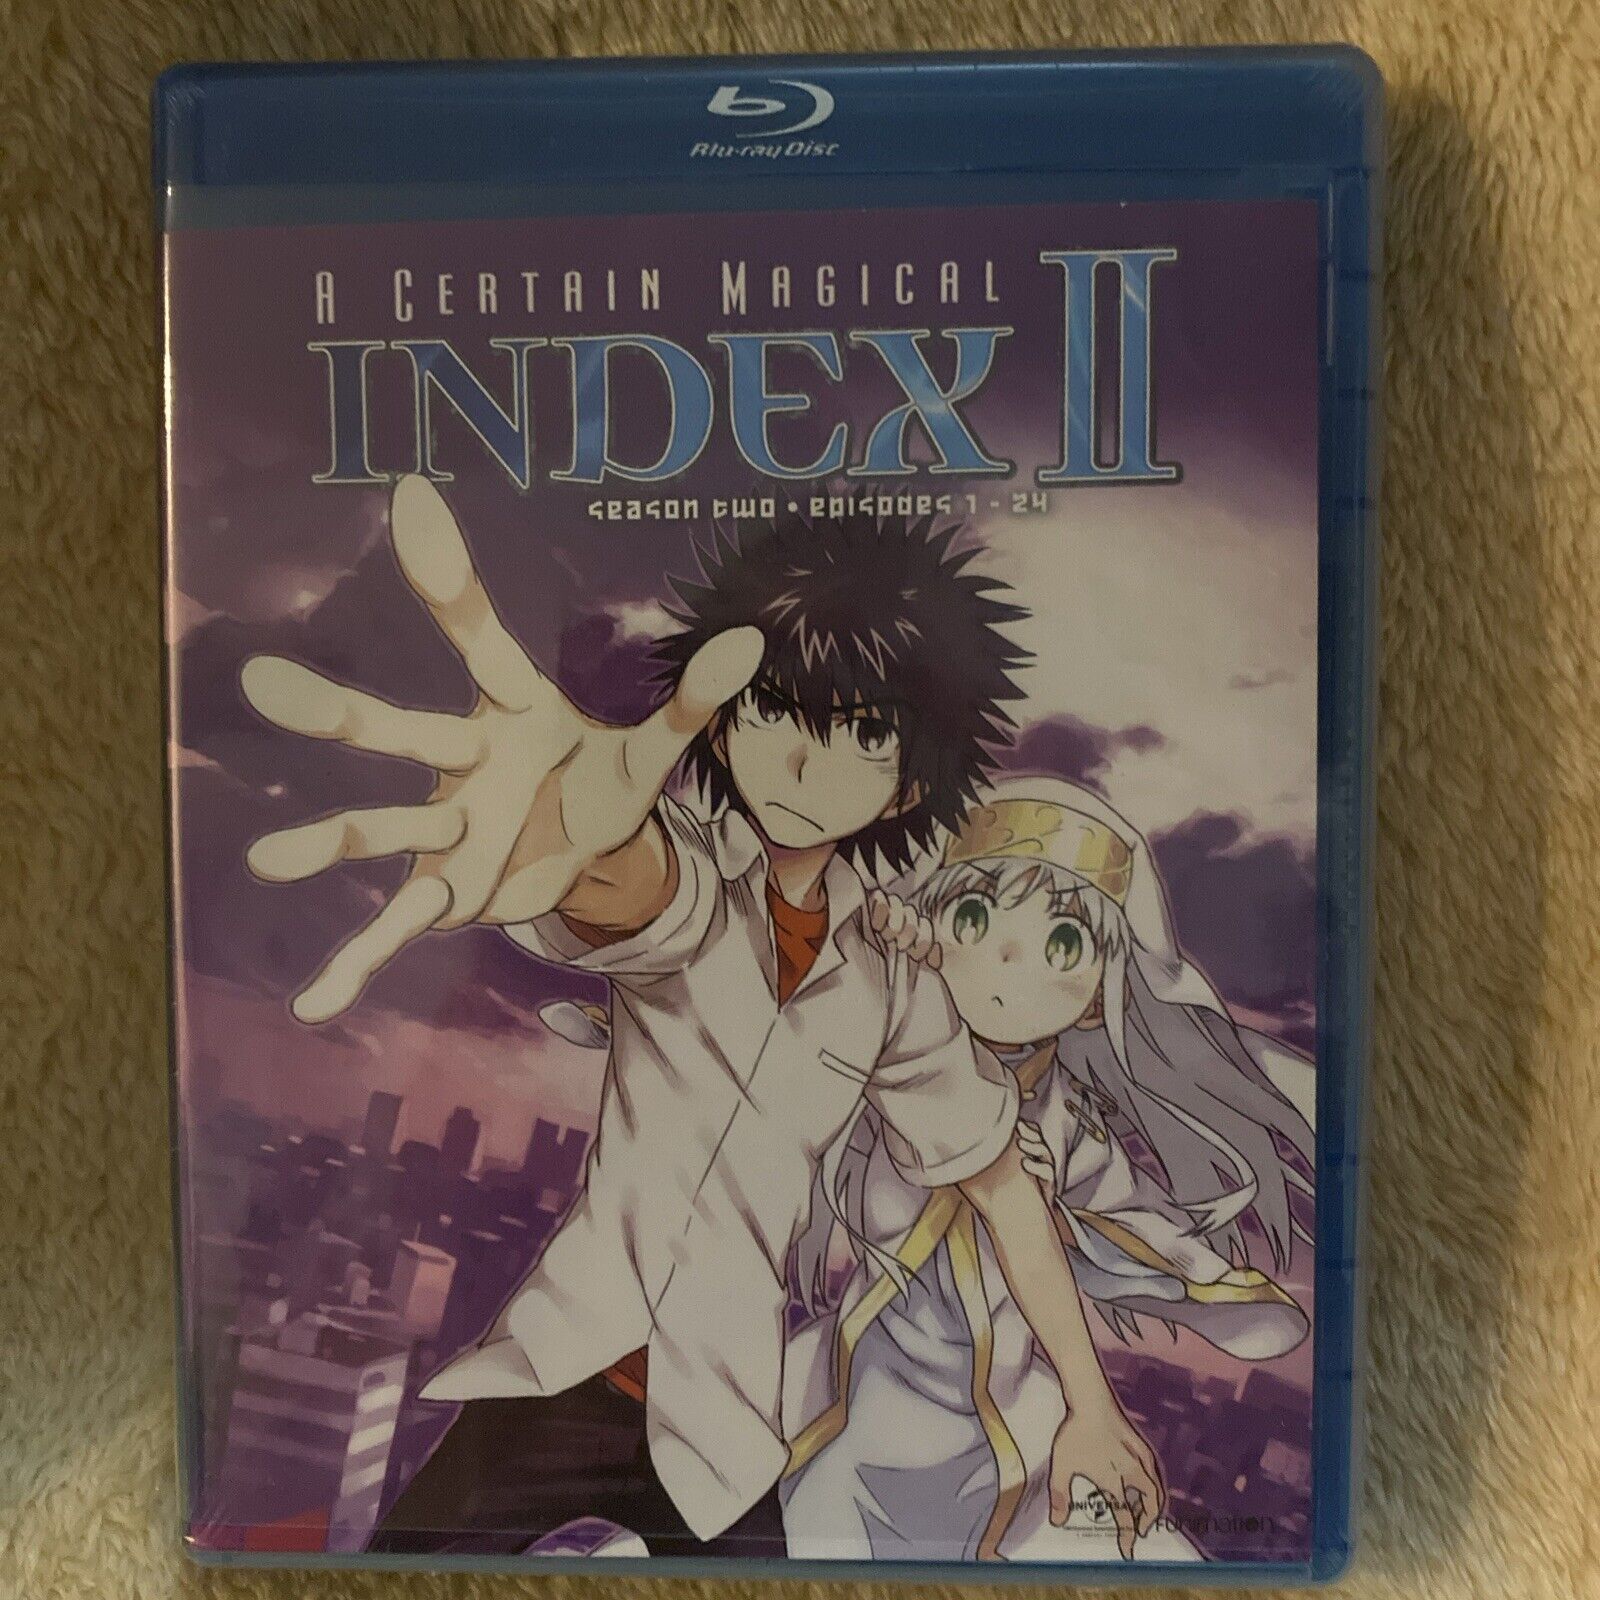 A Certain Magical Index II-Season Two (Blu-ray + DVD) New Sealed